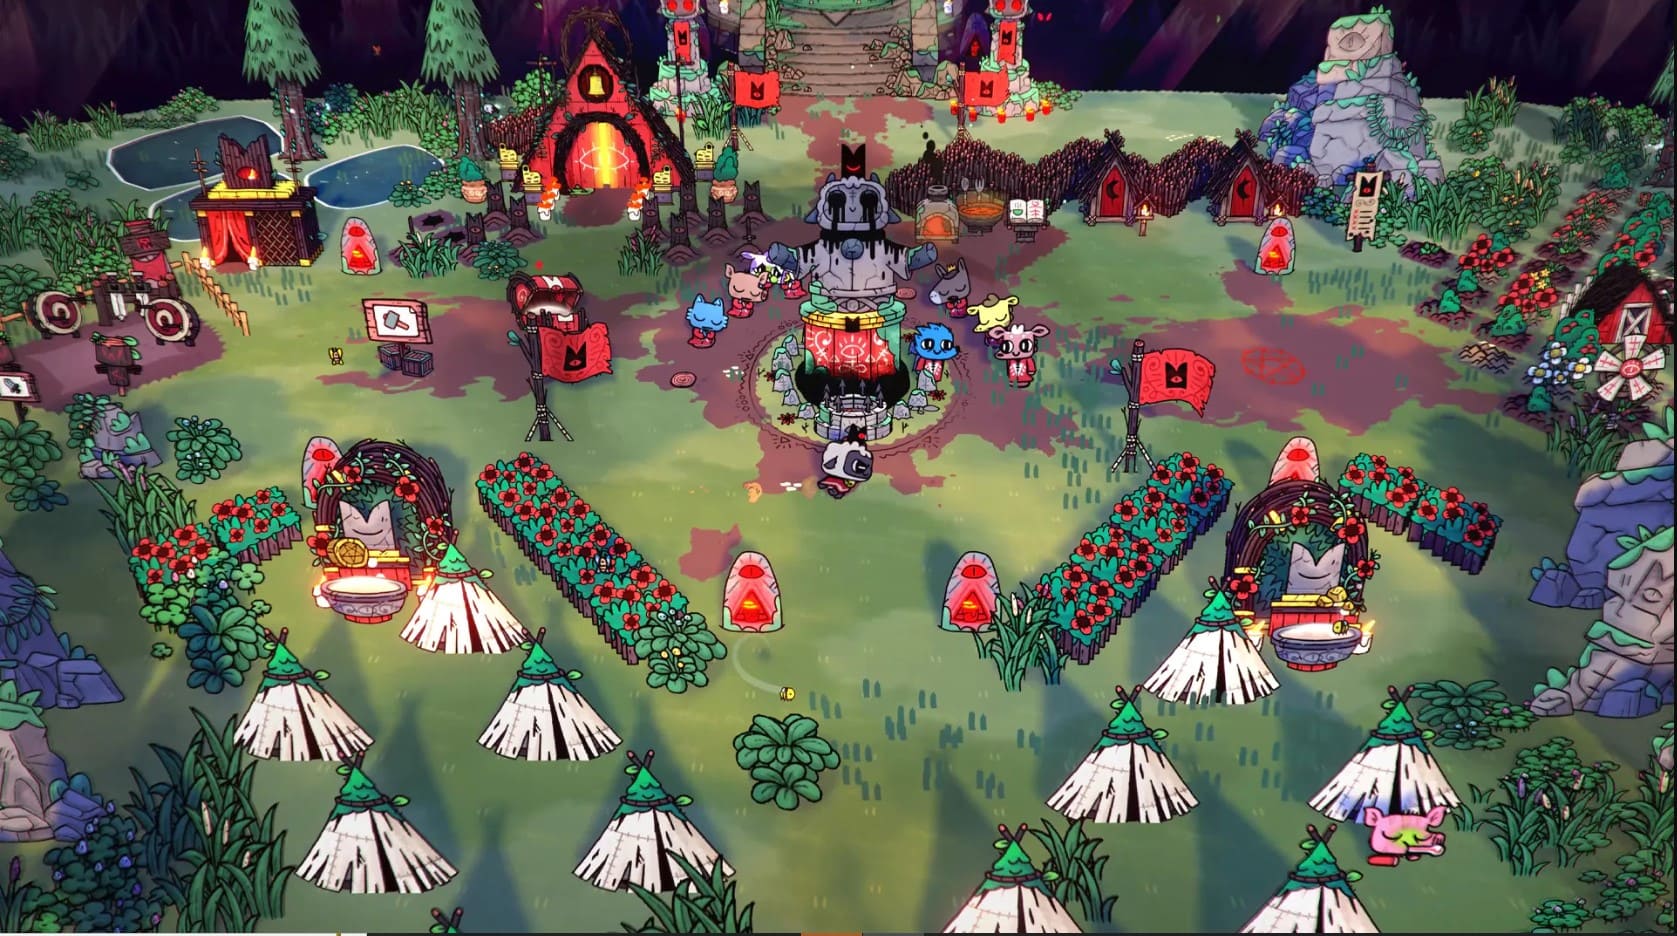 Screenshot of the cult camp in Cult of the Lamb. Followers are praying around the altar in the center.